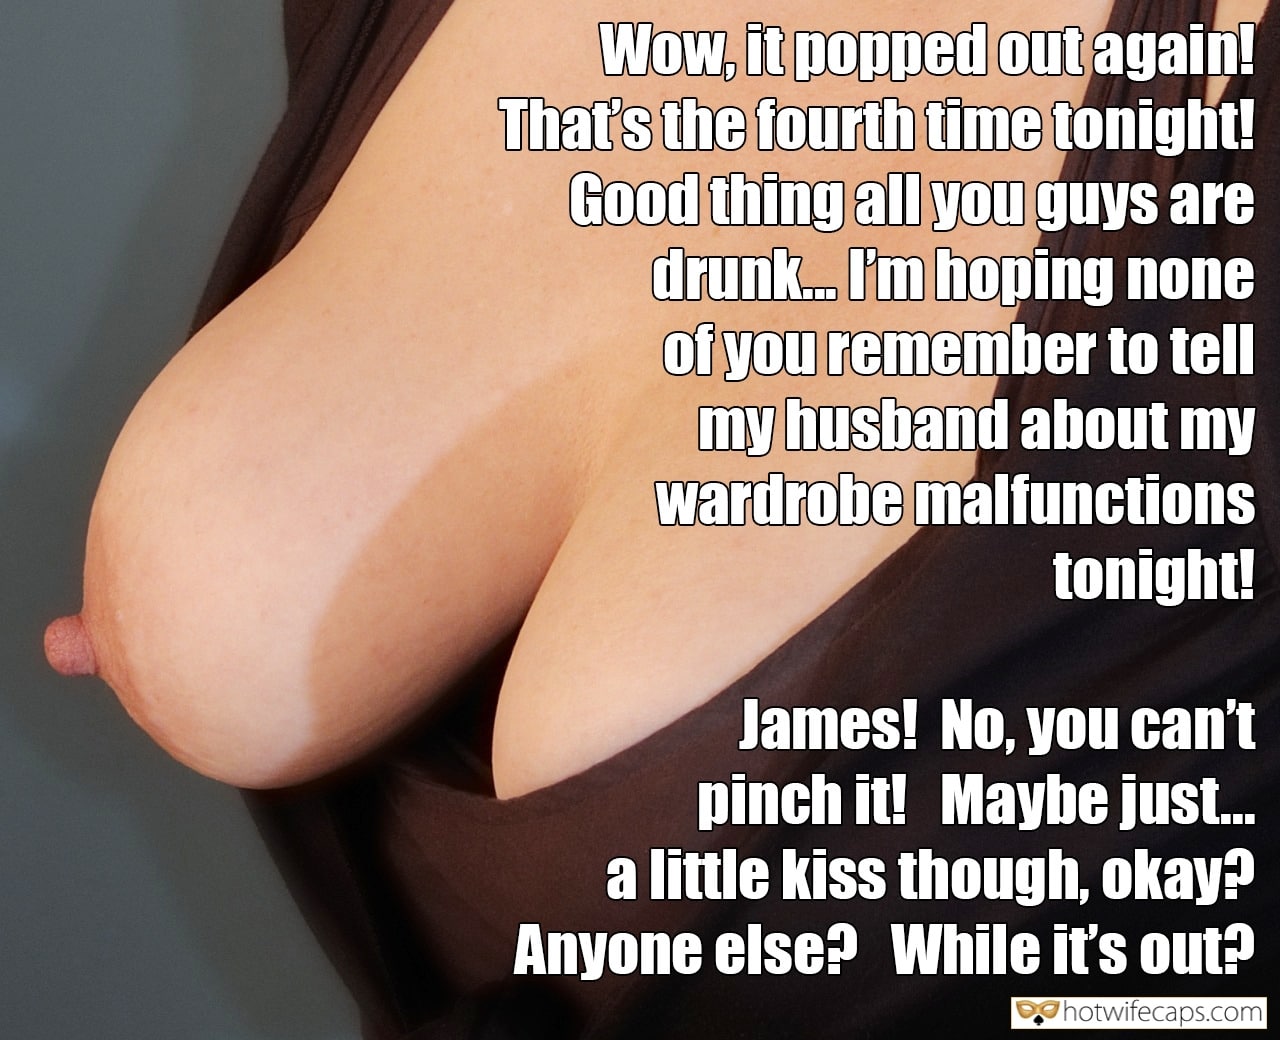 Friends Flashing Dirty Talk hotwife caption: Wow, it popped out again! That’s the fourth time tonight! Good thing all you guys are drunk. I’m hoping none of you remember to tell my husband about my wardrobe malfunctions tonight! James! No, you can’t pinch it! Maybe just....